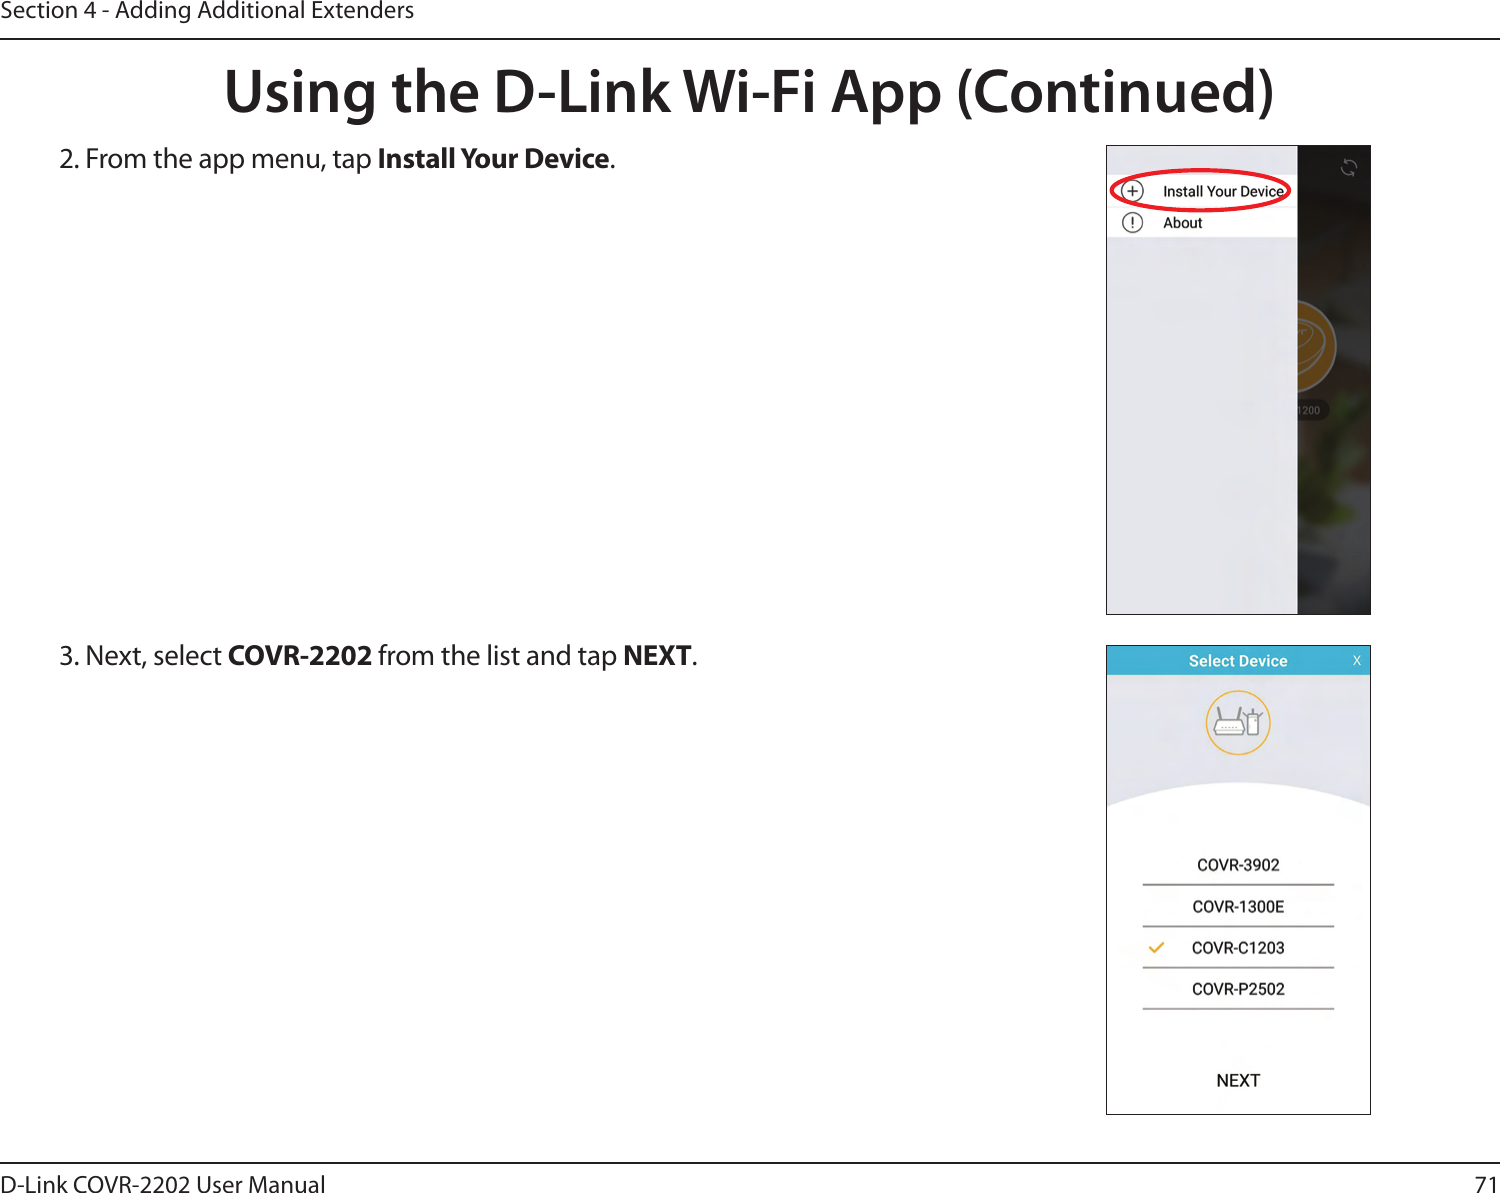 71D-Link COVR-2202 User ManualSection 4 - Adding Additional Extenders2. From the app menu, tap Install Your Device.Using the D-Link Wi-Fi App (Continued)3. Next, select COVR-2202 from the list and tap NEXT.